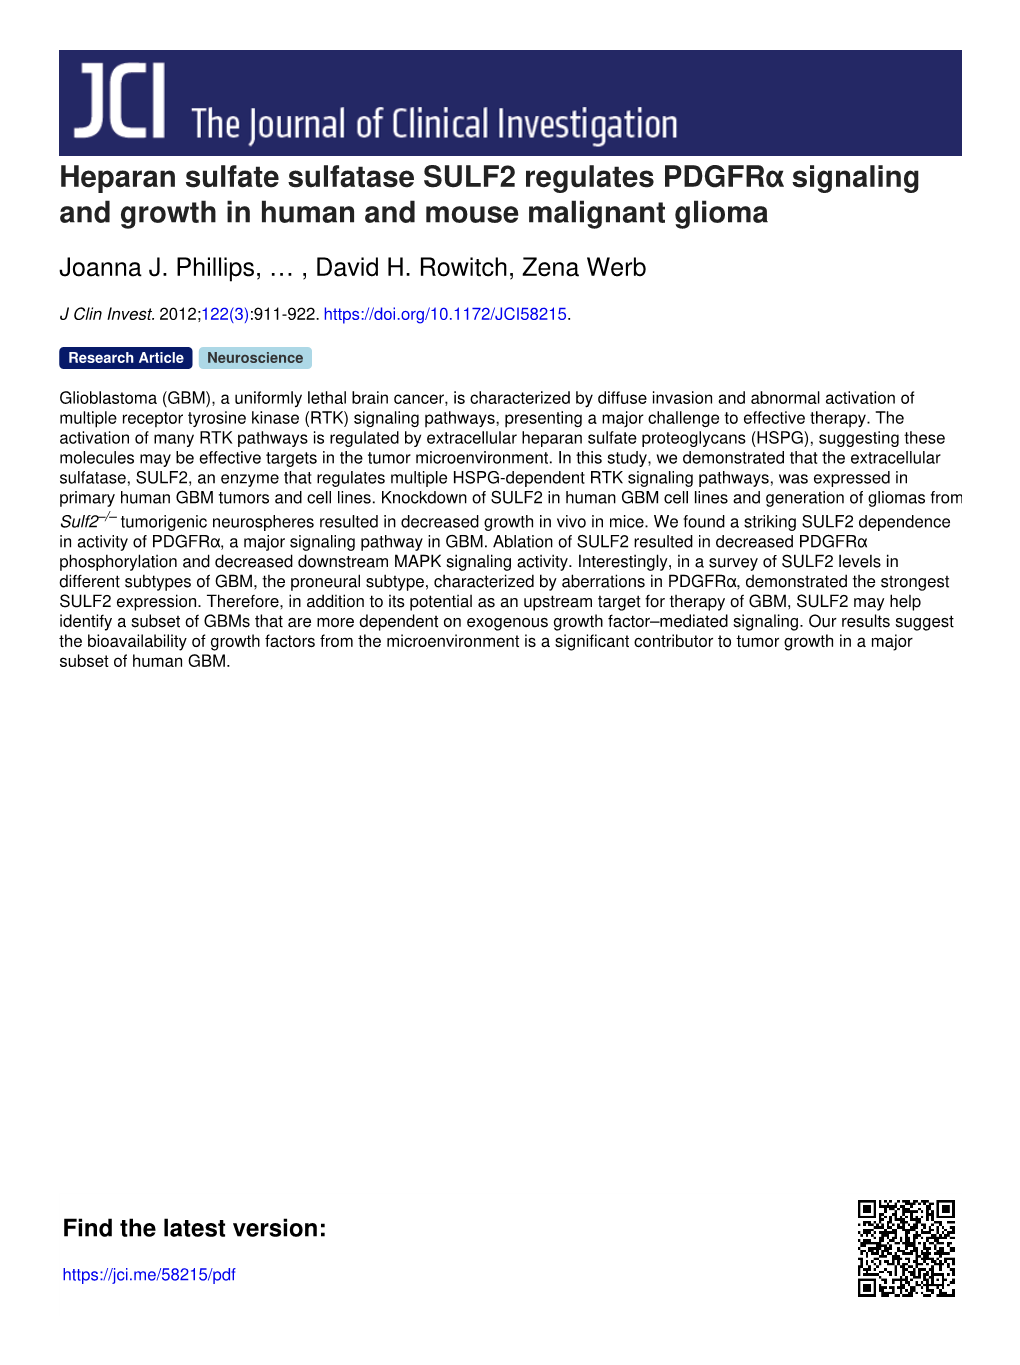 Heparan Sulfate Sulfatase SULF2 Regulates Pdgfrα Signaling and Growth in Human and Mouse Malignant Glioma